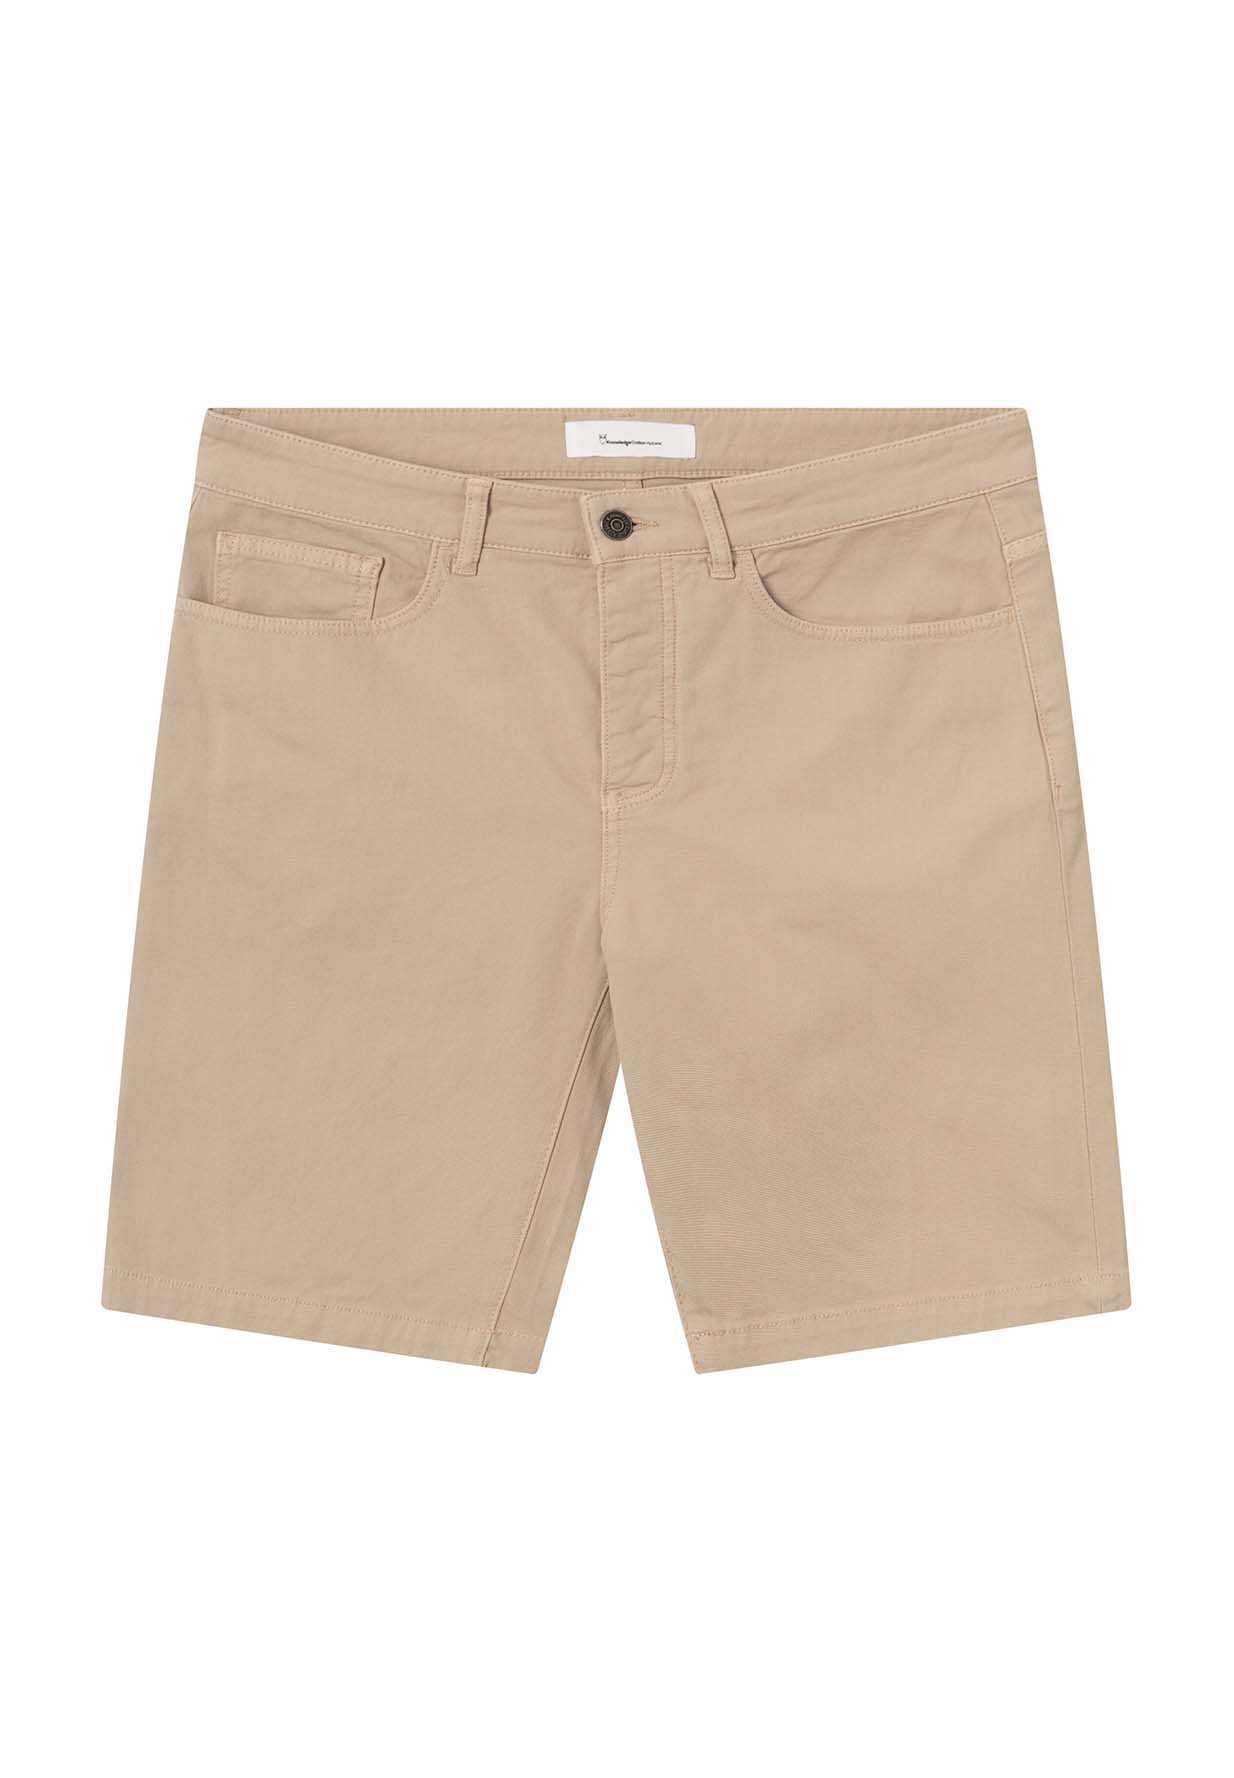 KNOWLEDGECOTTON APPAREL Loose 5-Pocket Canvas Twill Shorts light feather gray 30